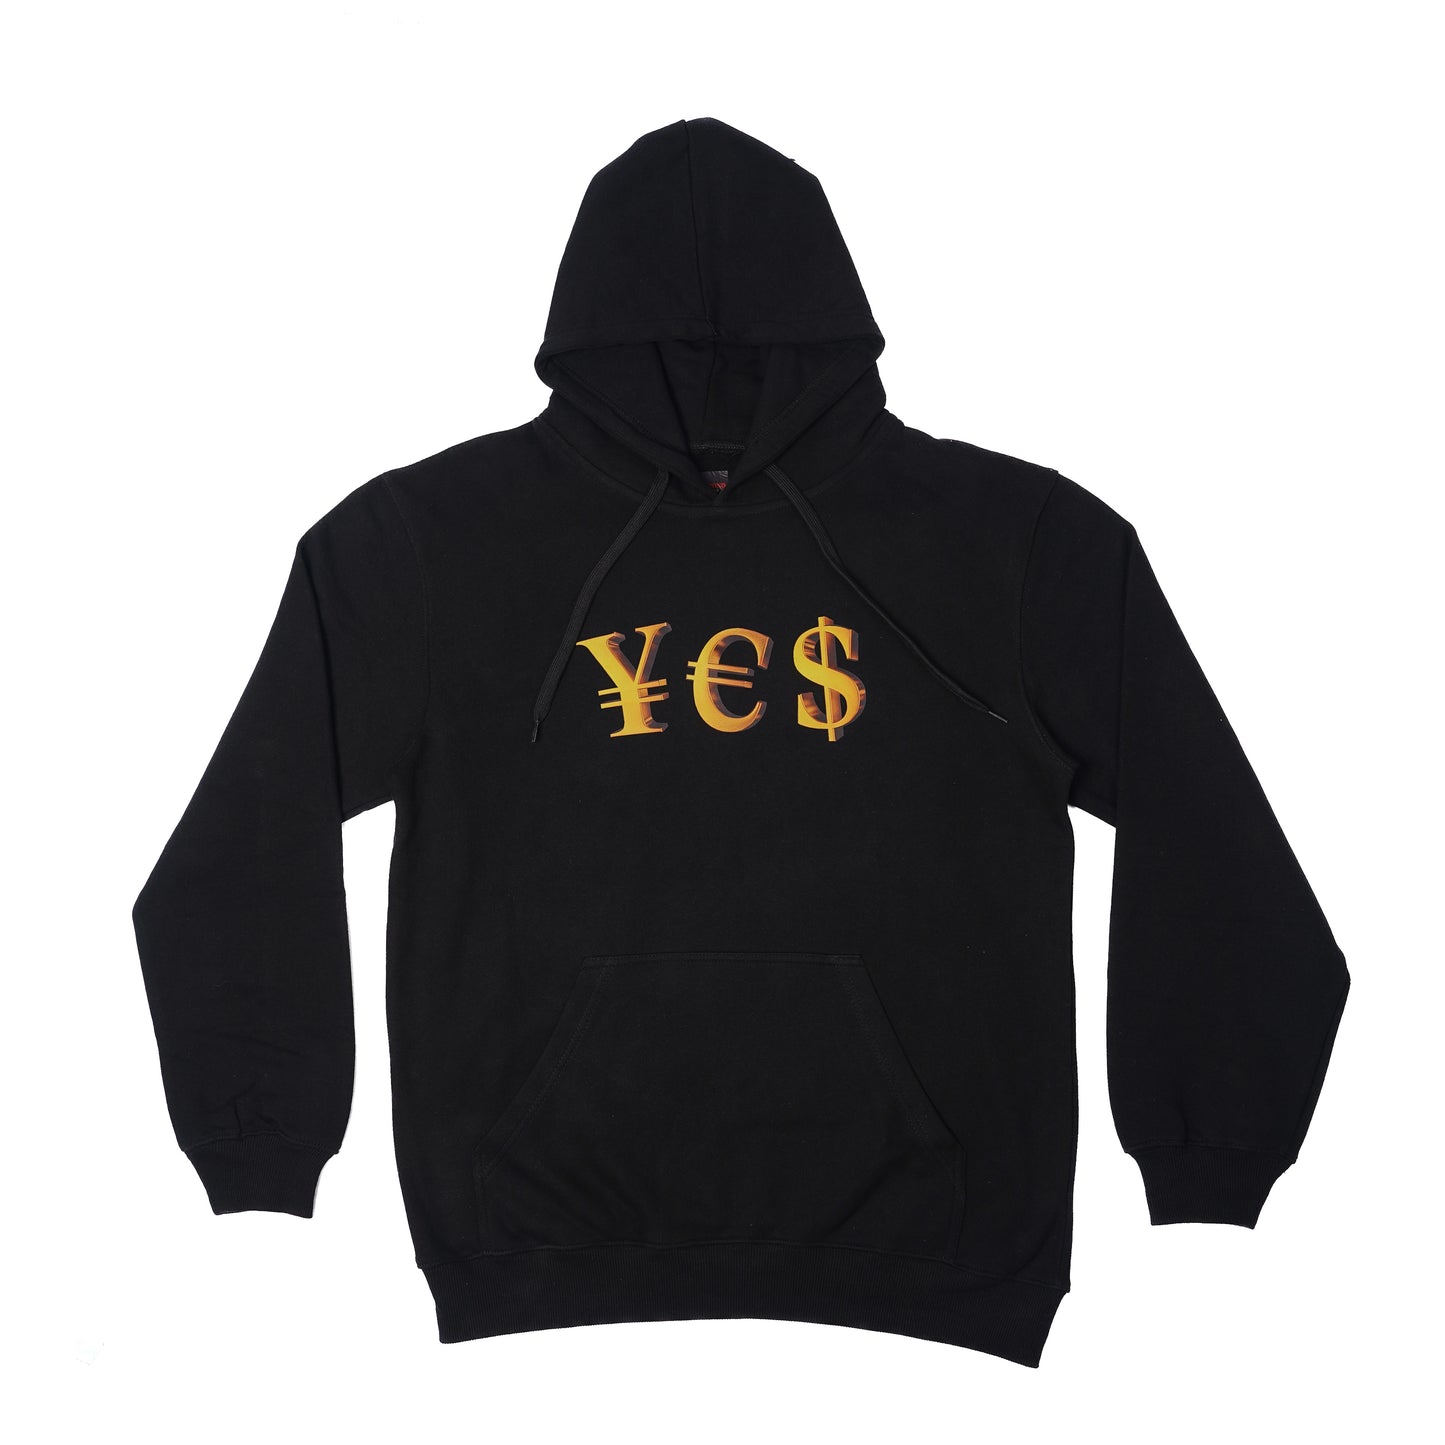 Limited Edition €URO TRA$H ¥€$ HOODIE